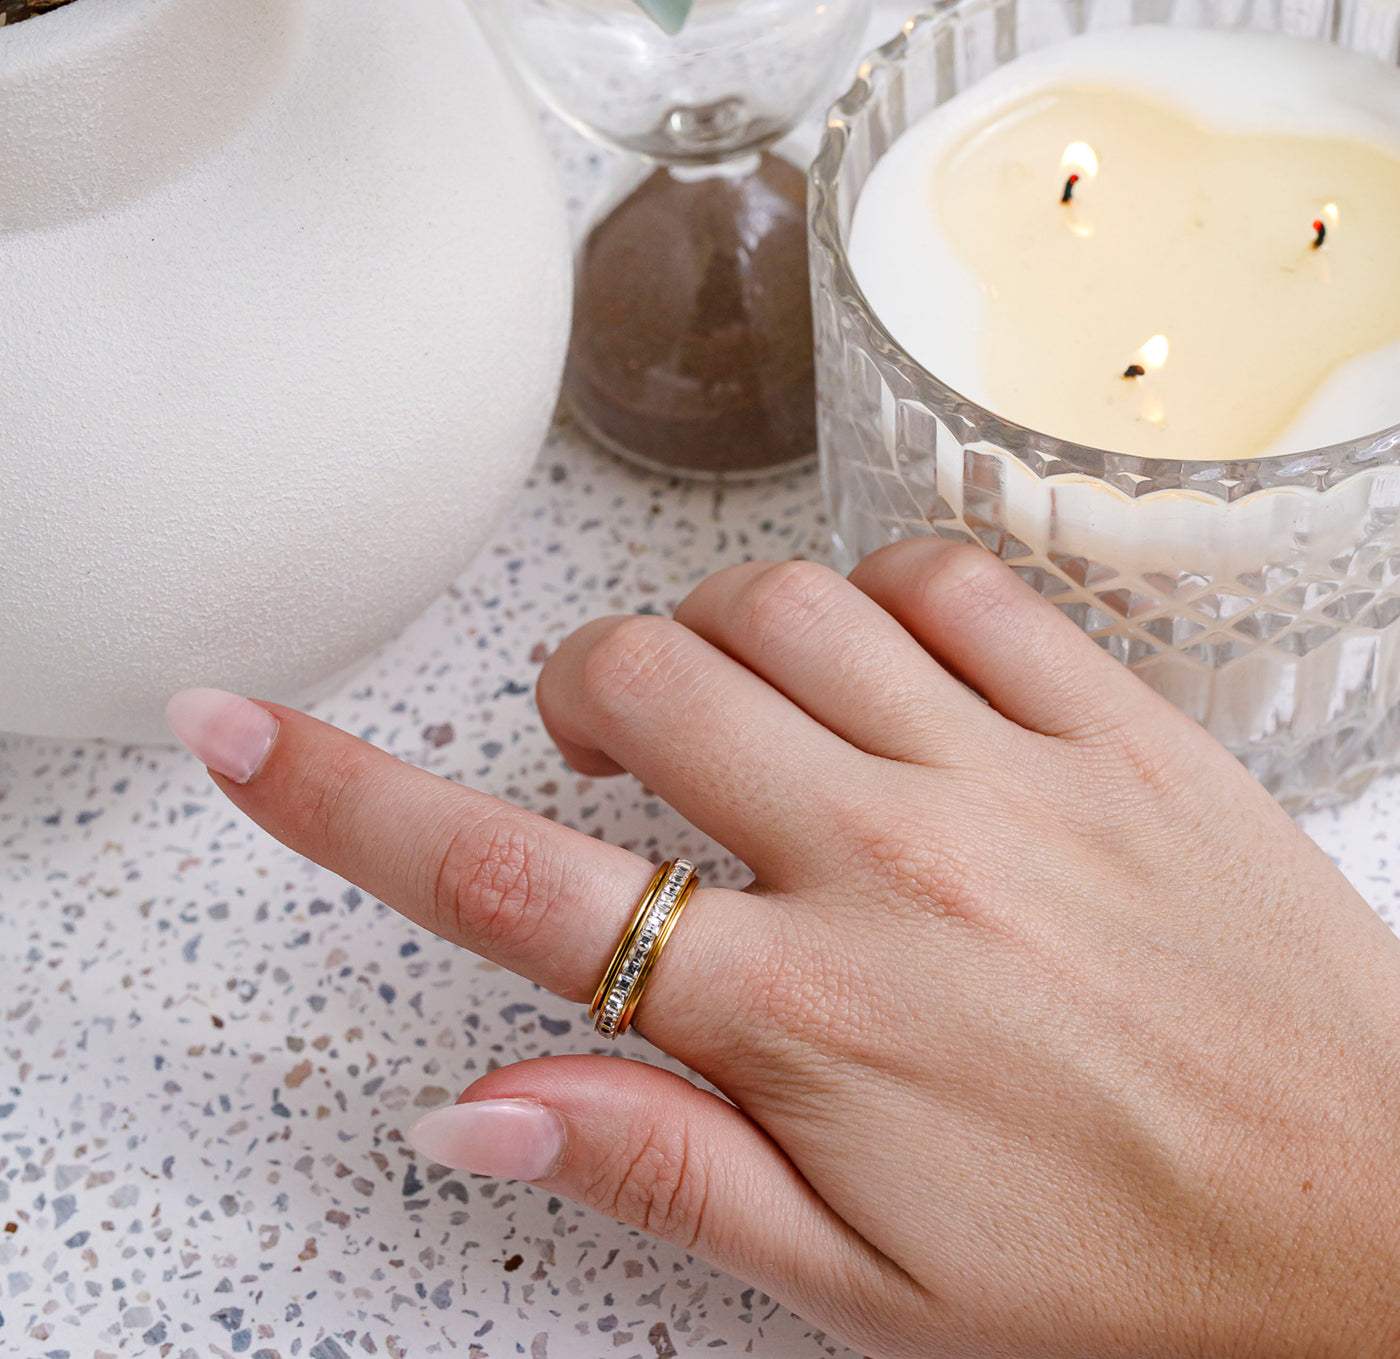 Elevate Rotating Worry Ring